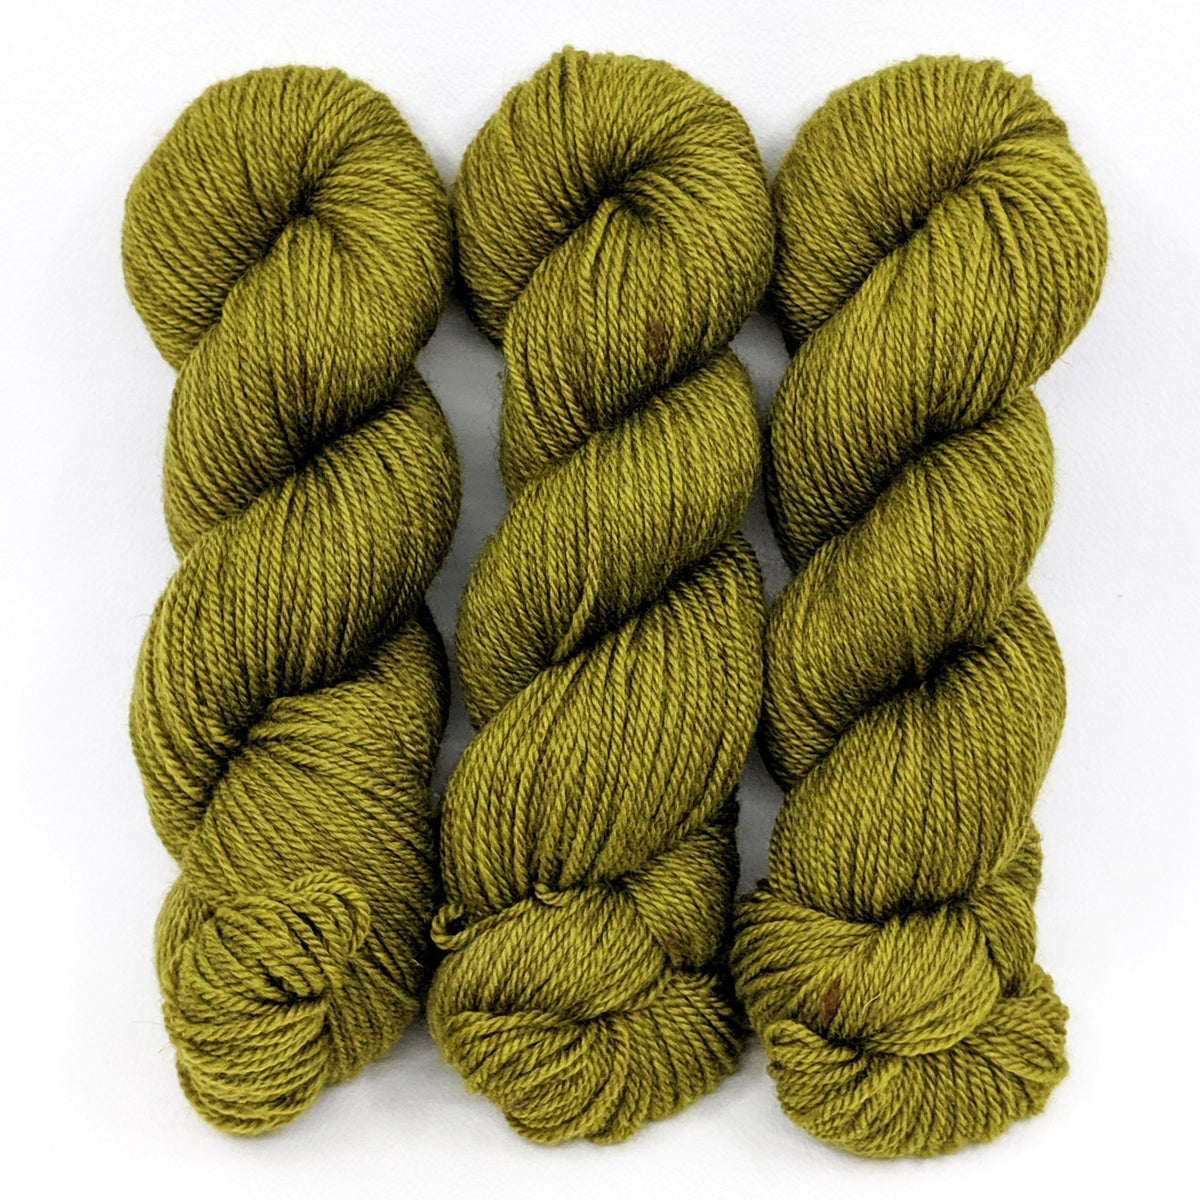 Moss-Lascaux Worsted - Dyed Stock